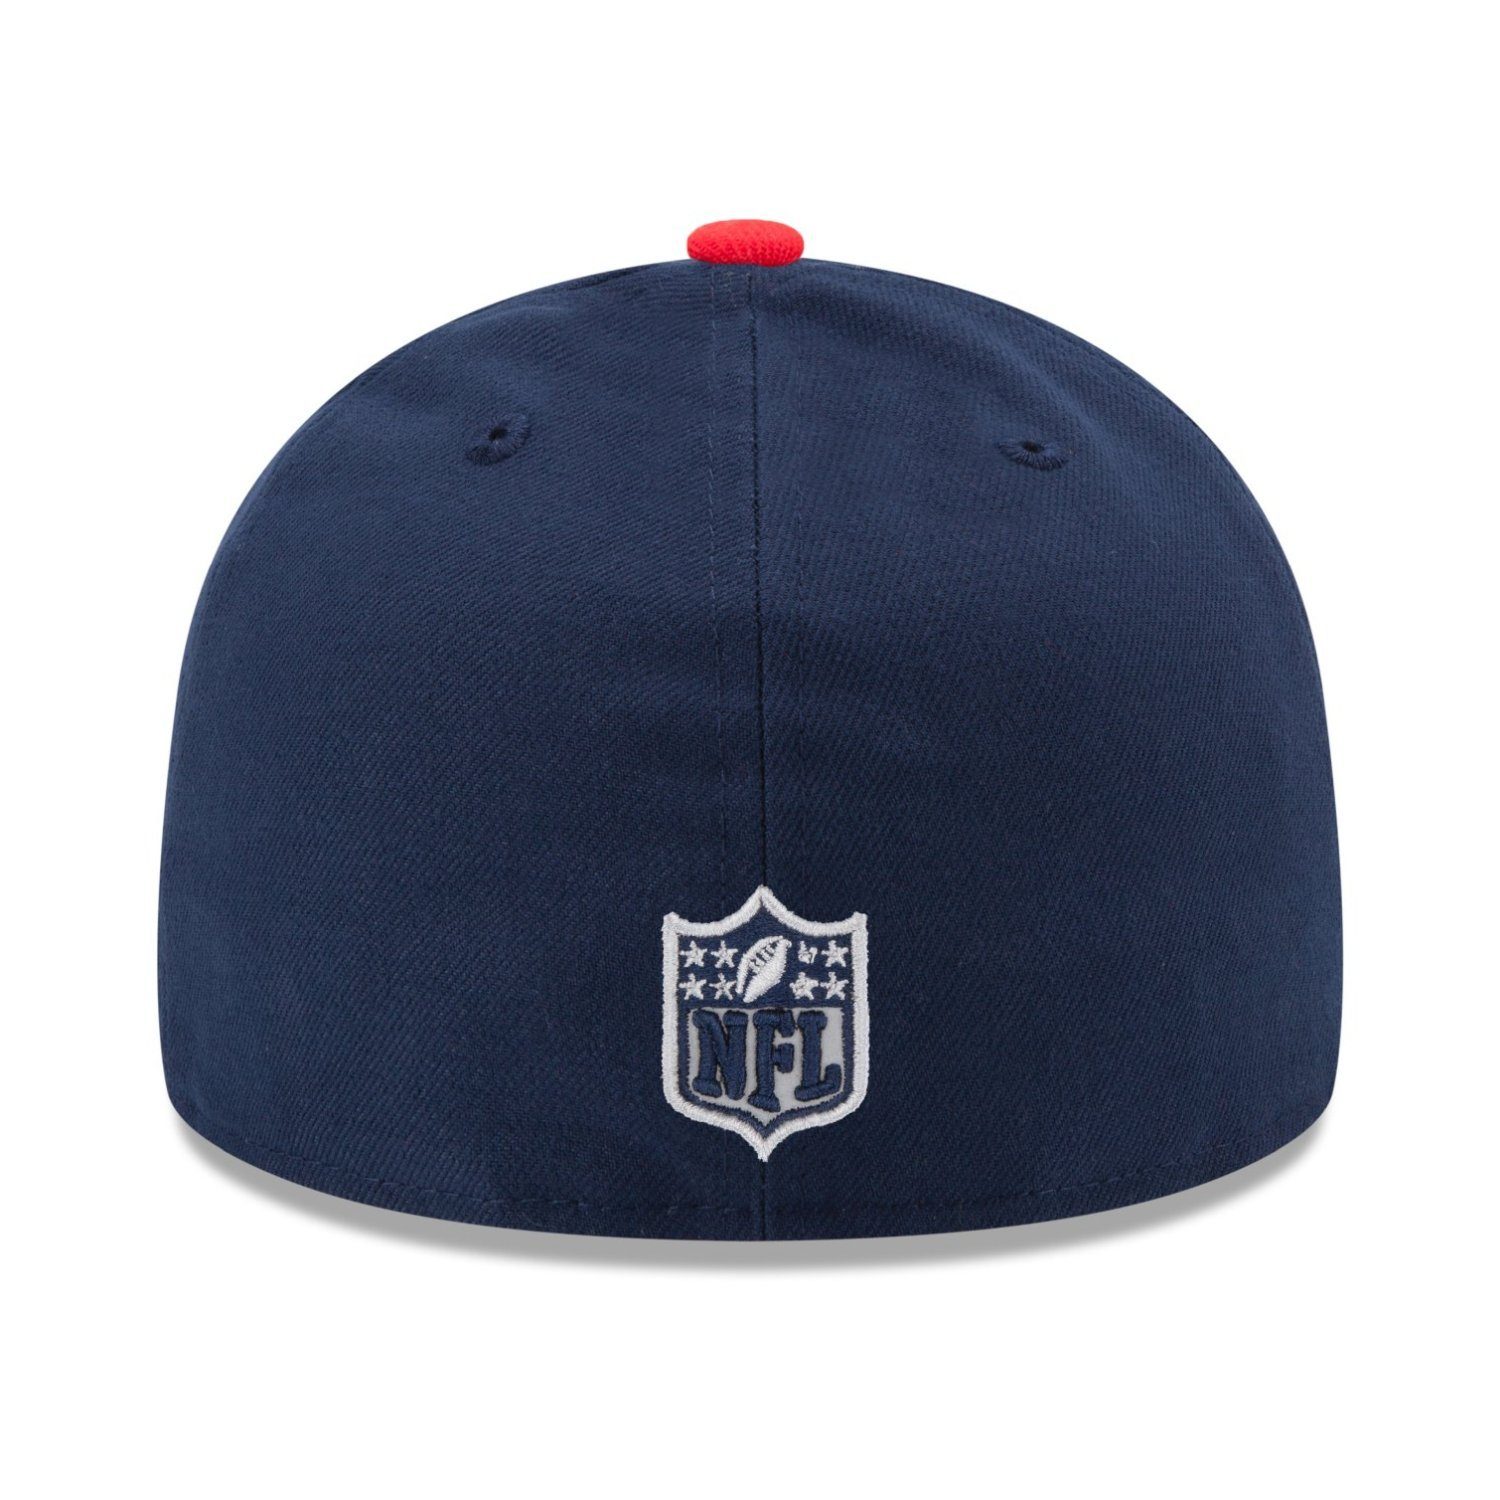 NFL England New Fitted SPILL Patriots Cap New Era Logo 59Fifty Teams